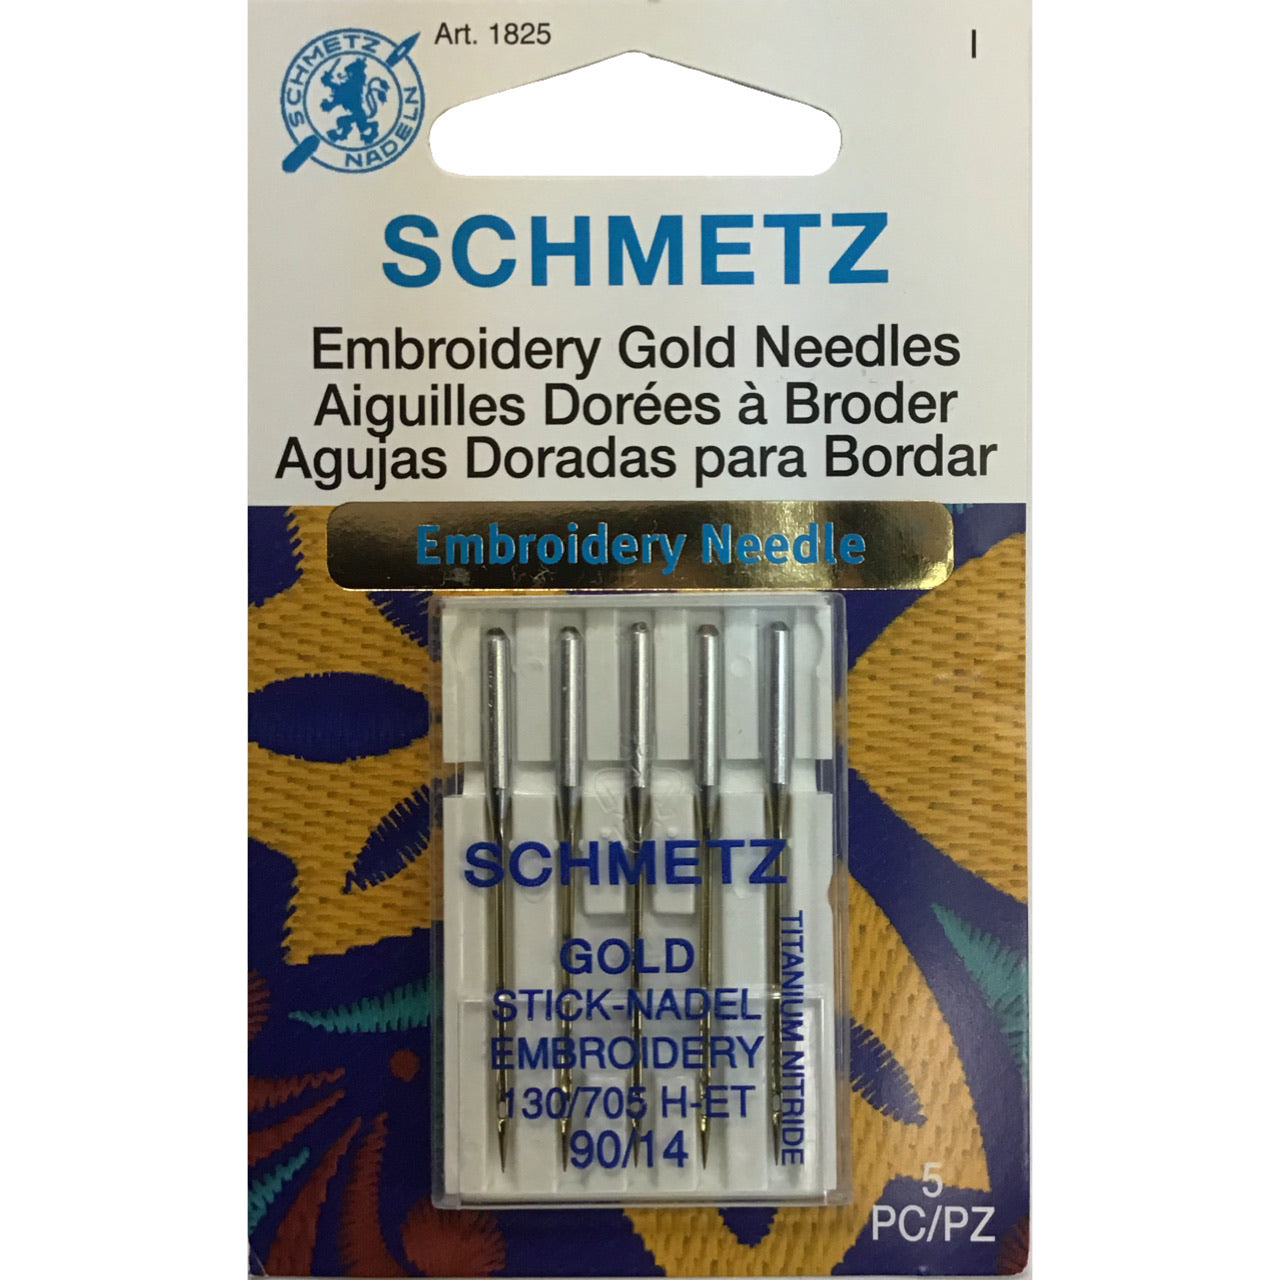 Embroidery Gold Sewing Machine Needles - 90/14